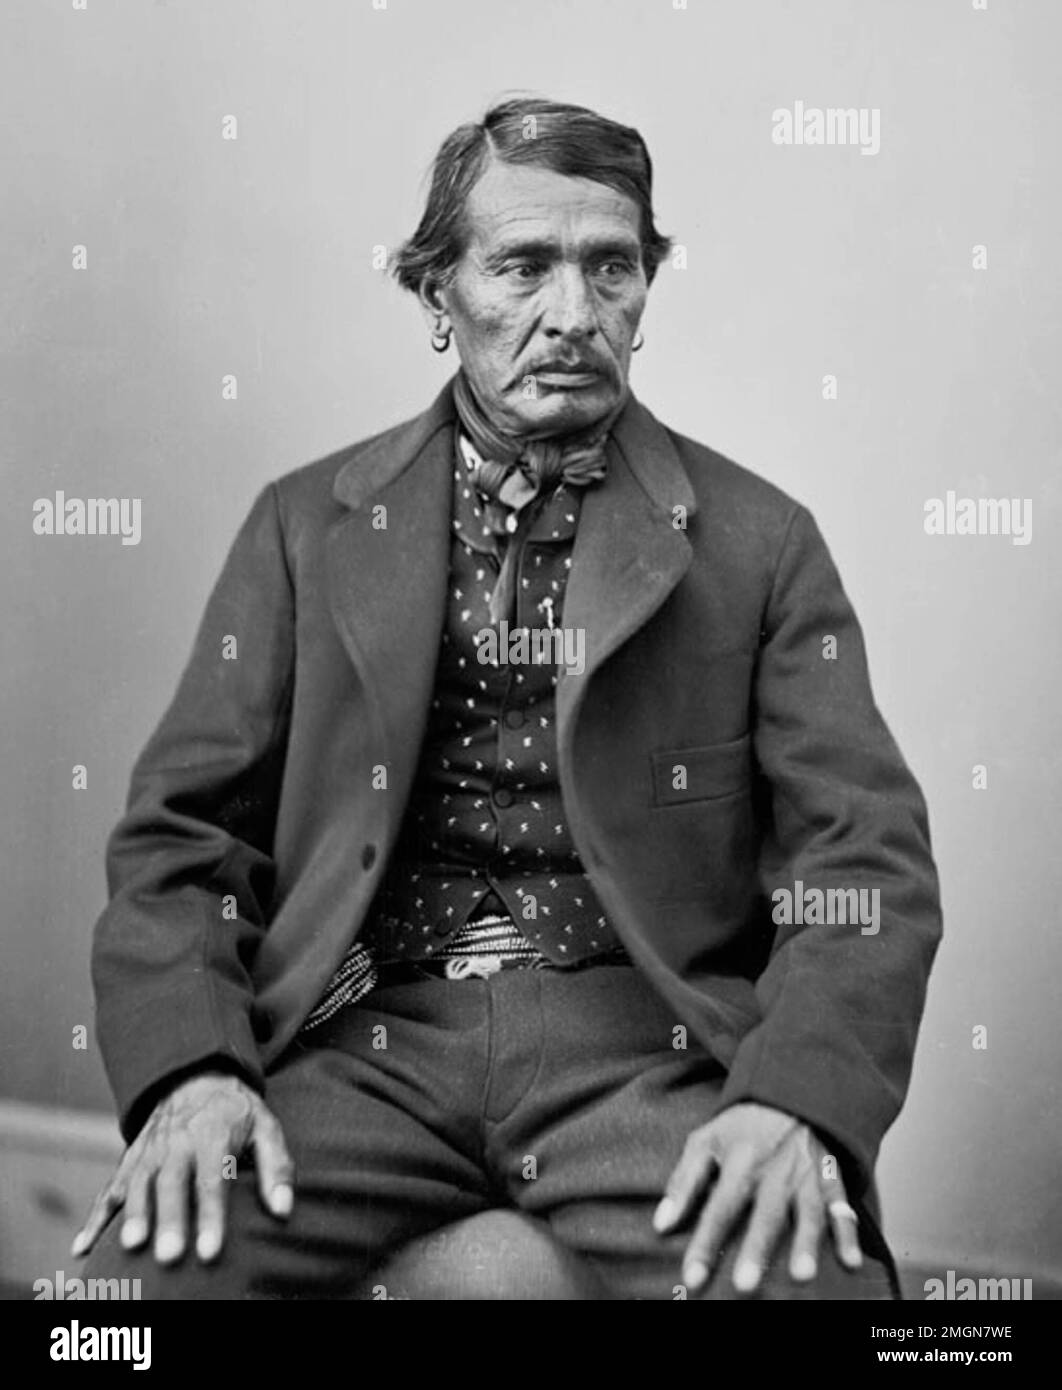 The Caddo chief George Washington was also known as Shoetat or 'Little Boy.' Stock Photo